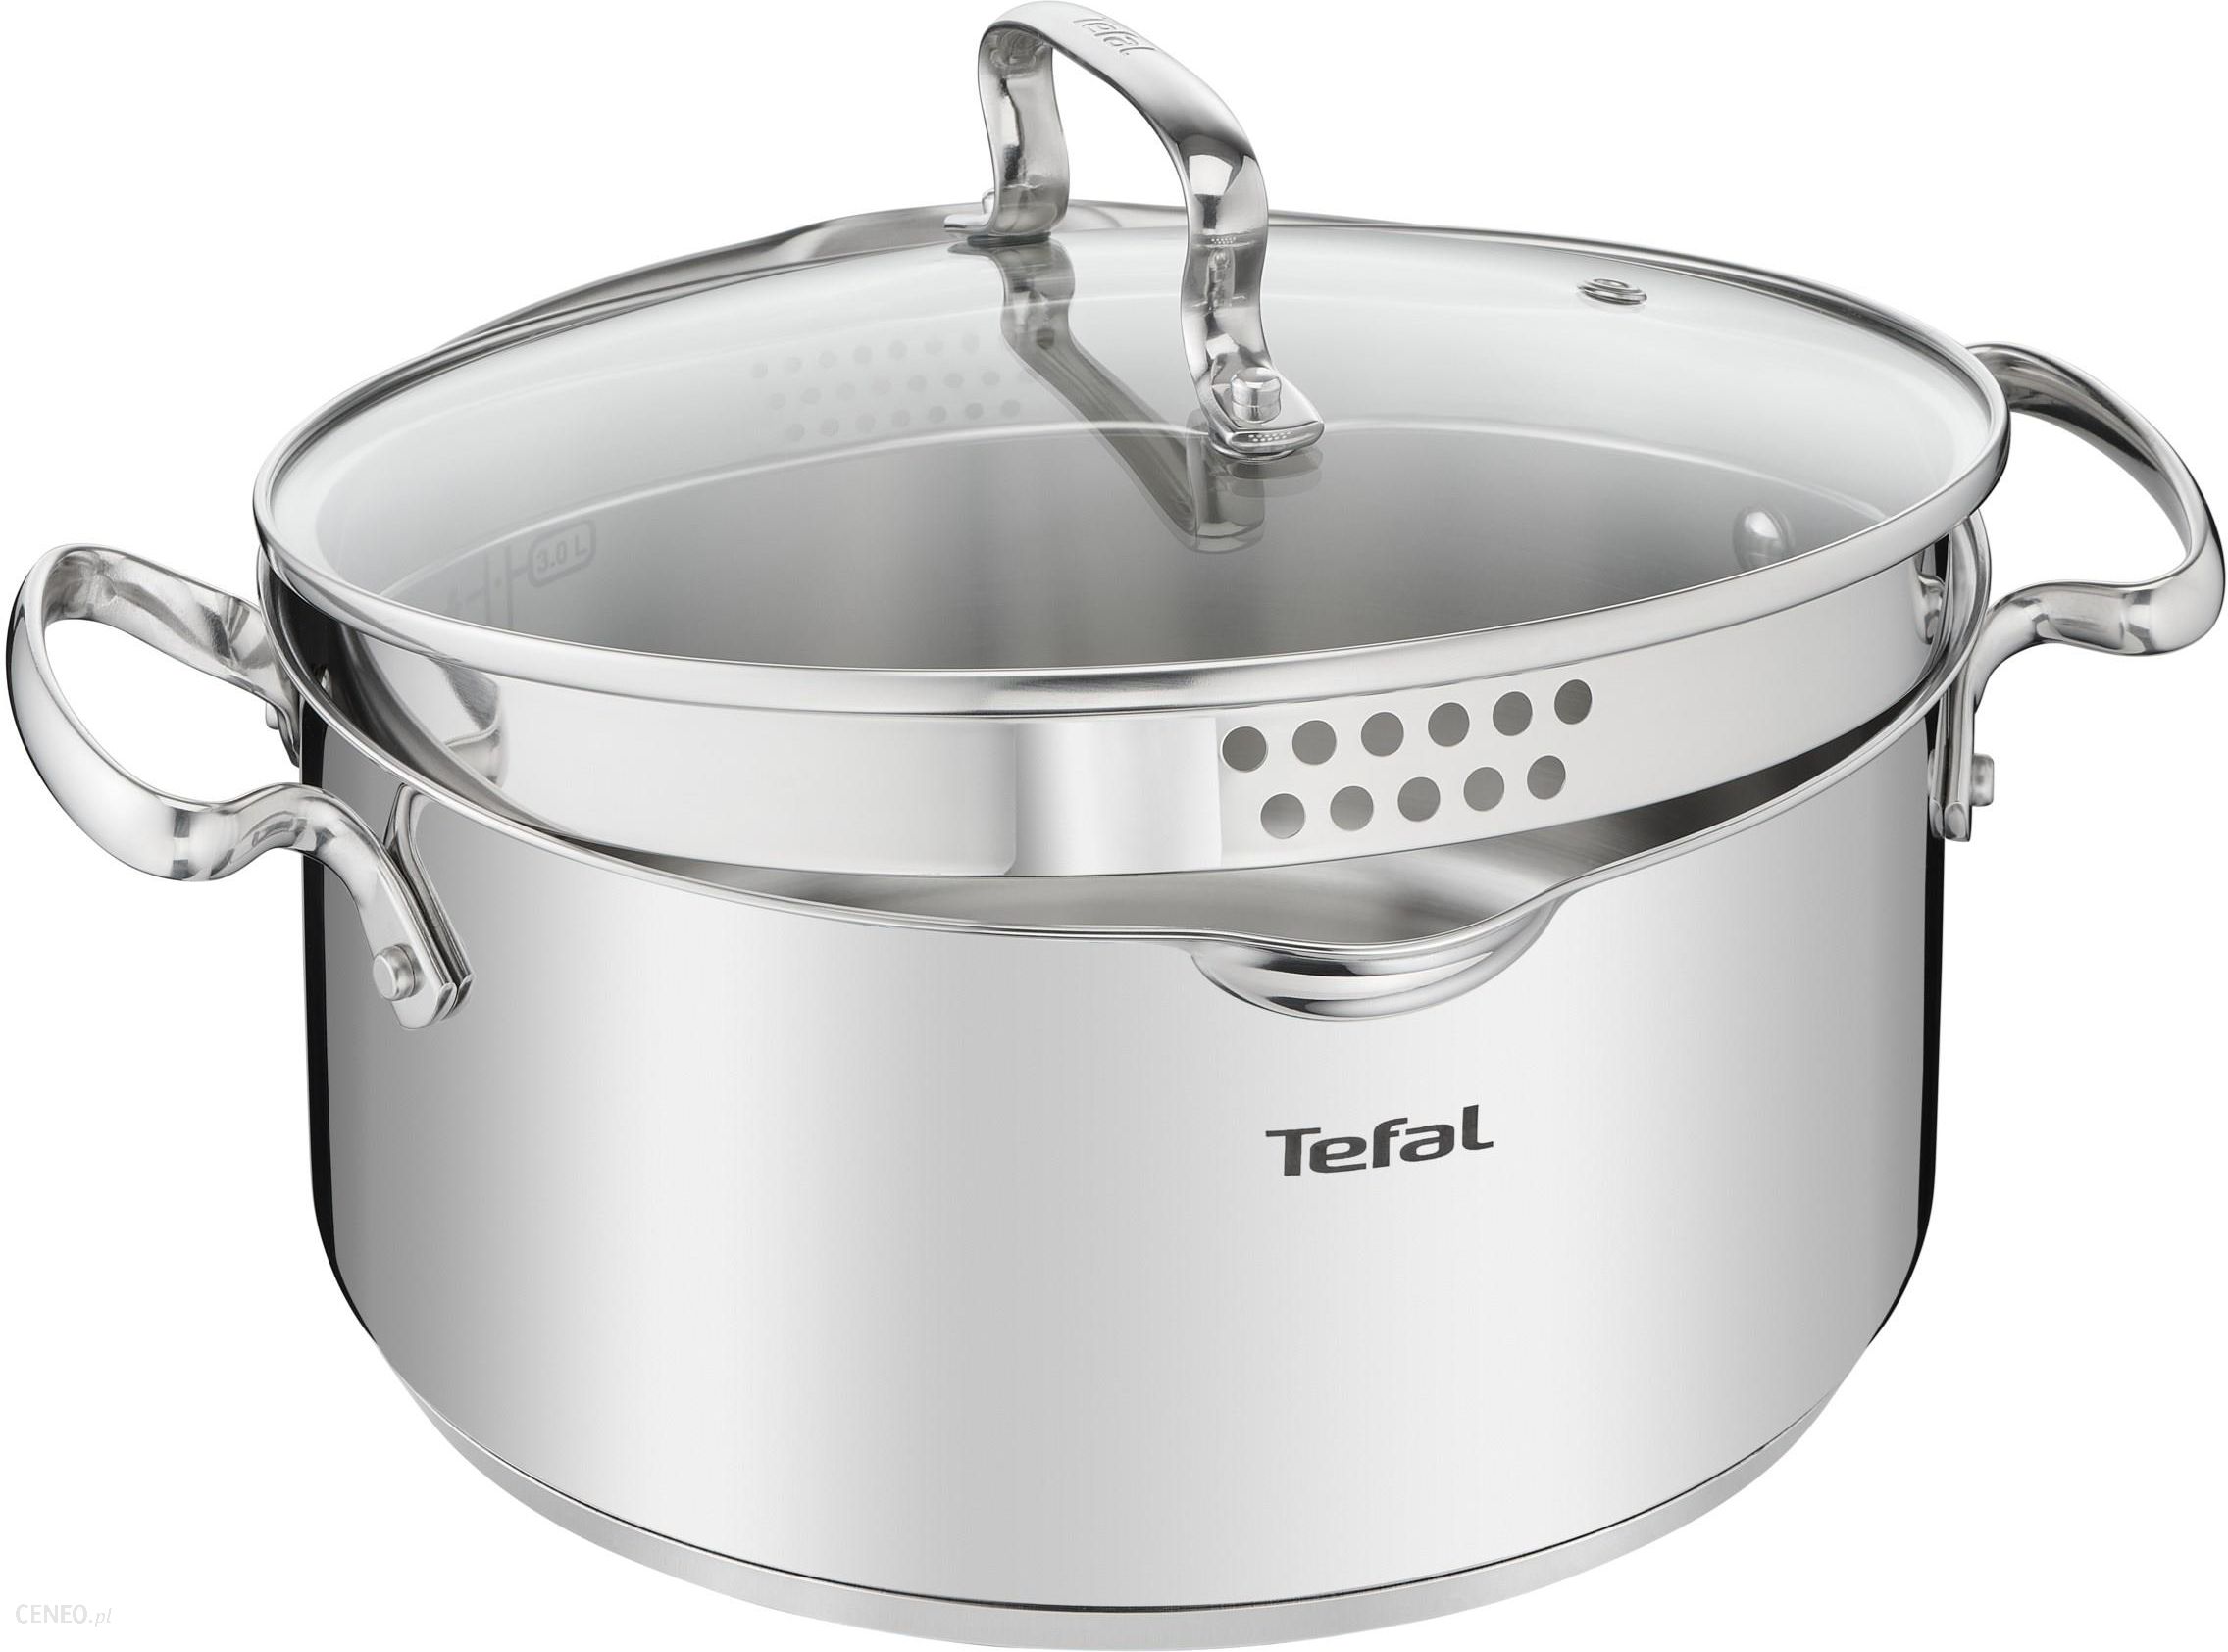 Tefal Duetto+ G7194655 24cm